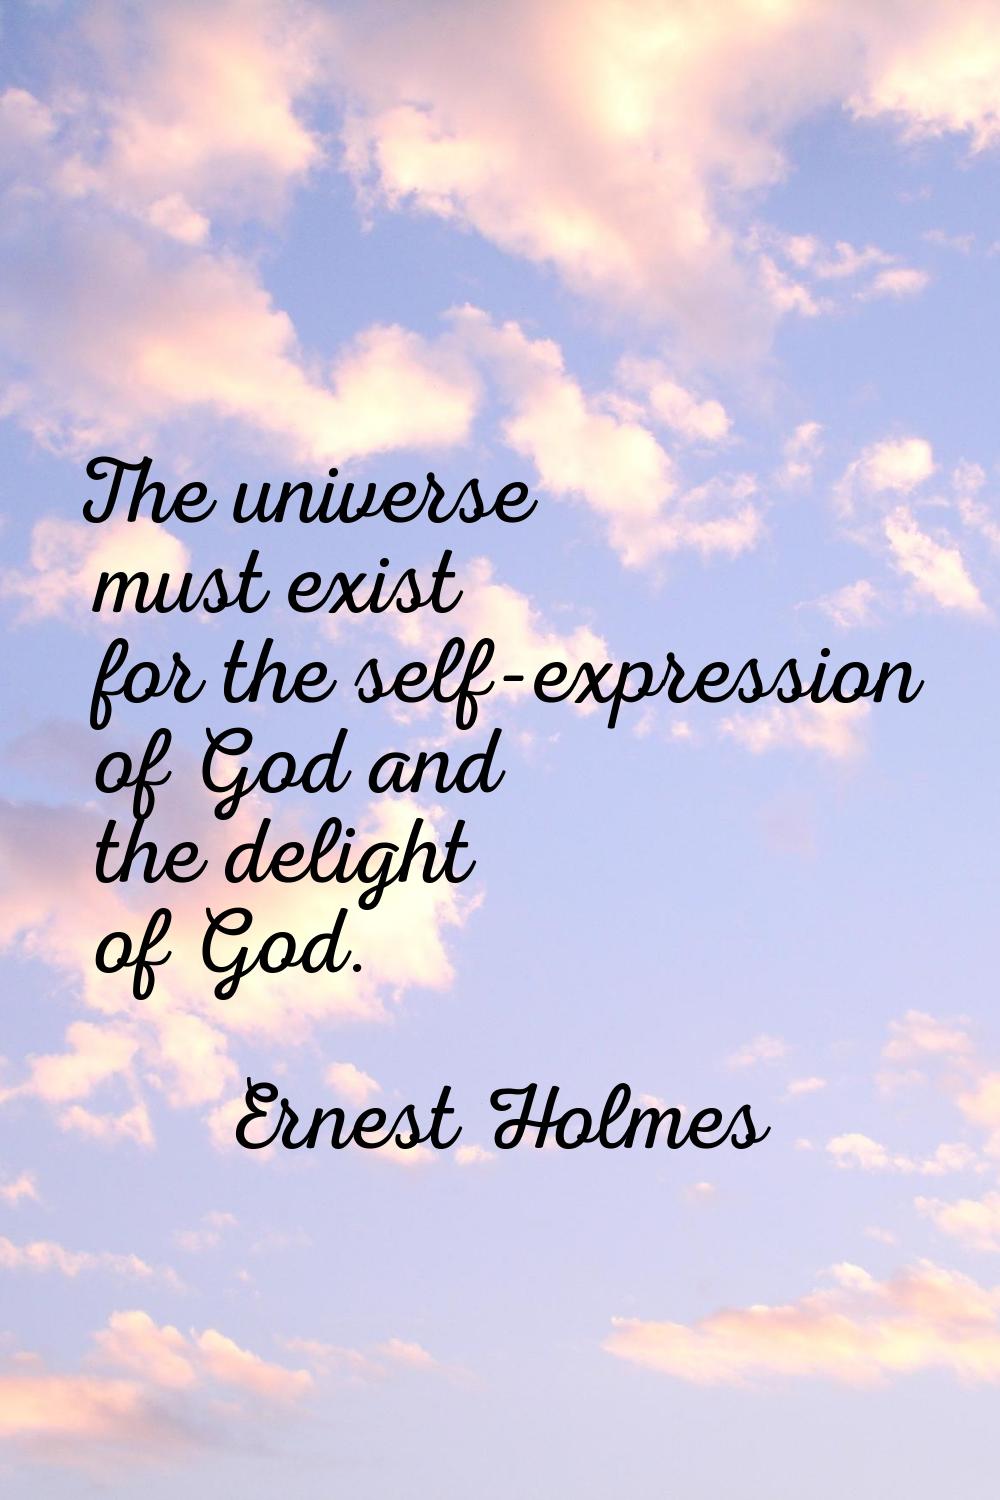 The universe must exist for the self-expression of God and the delight of God.